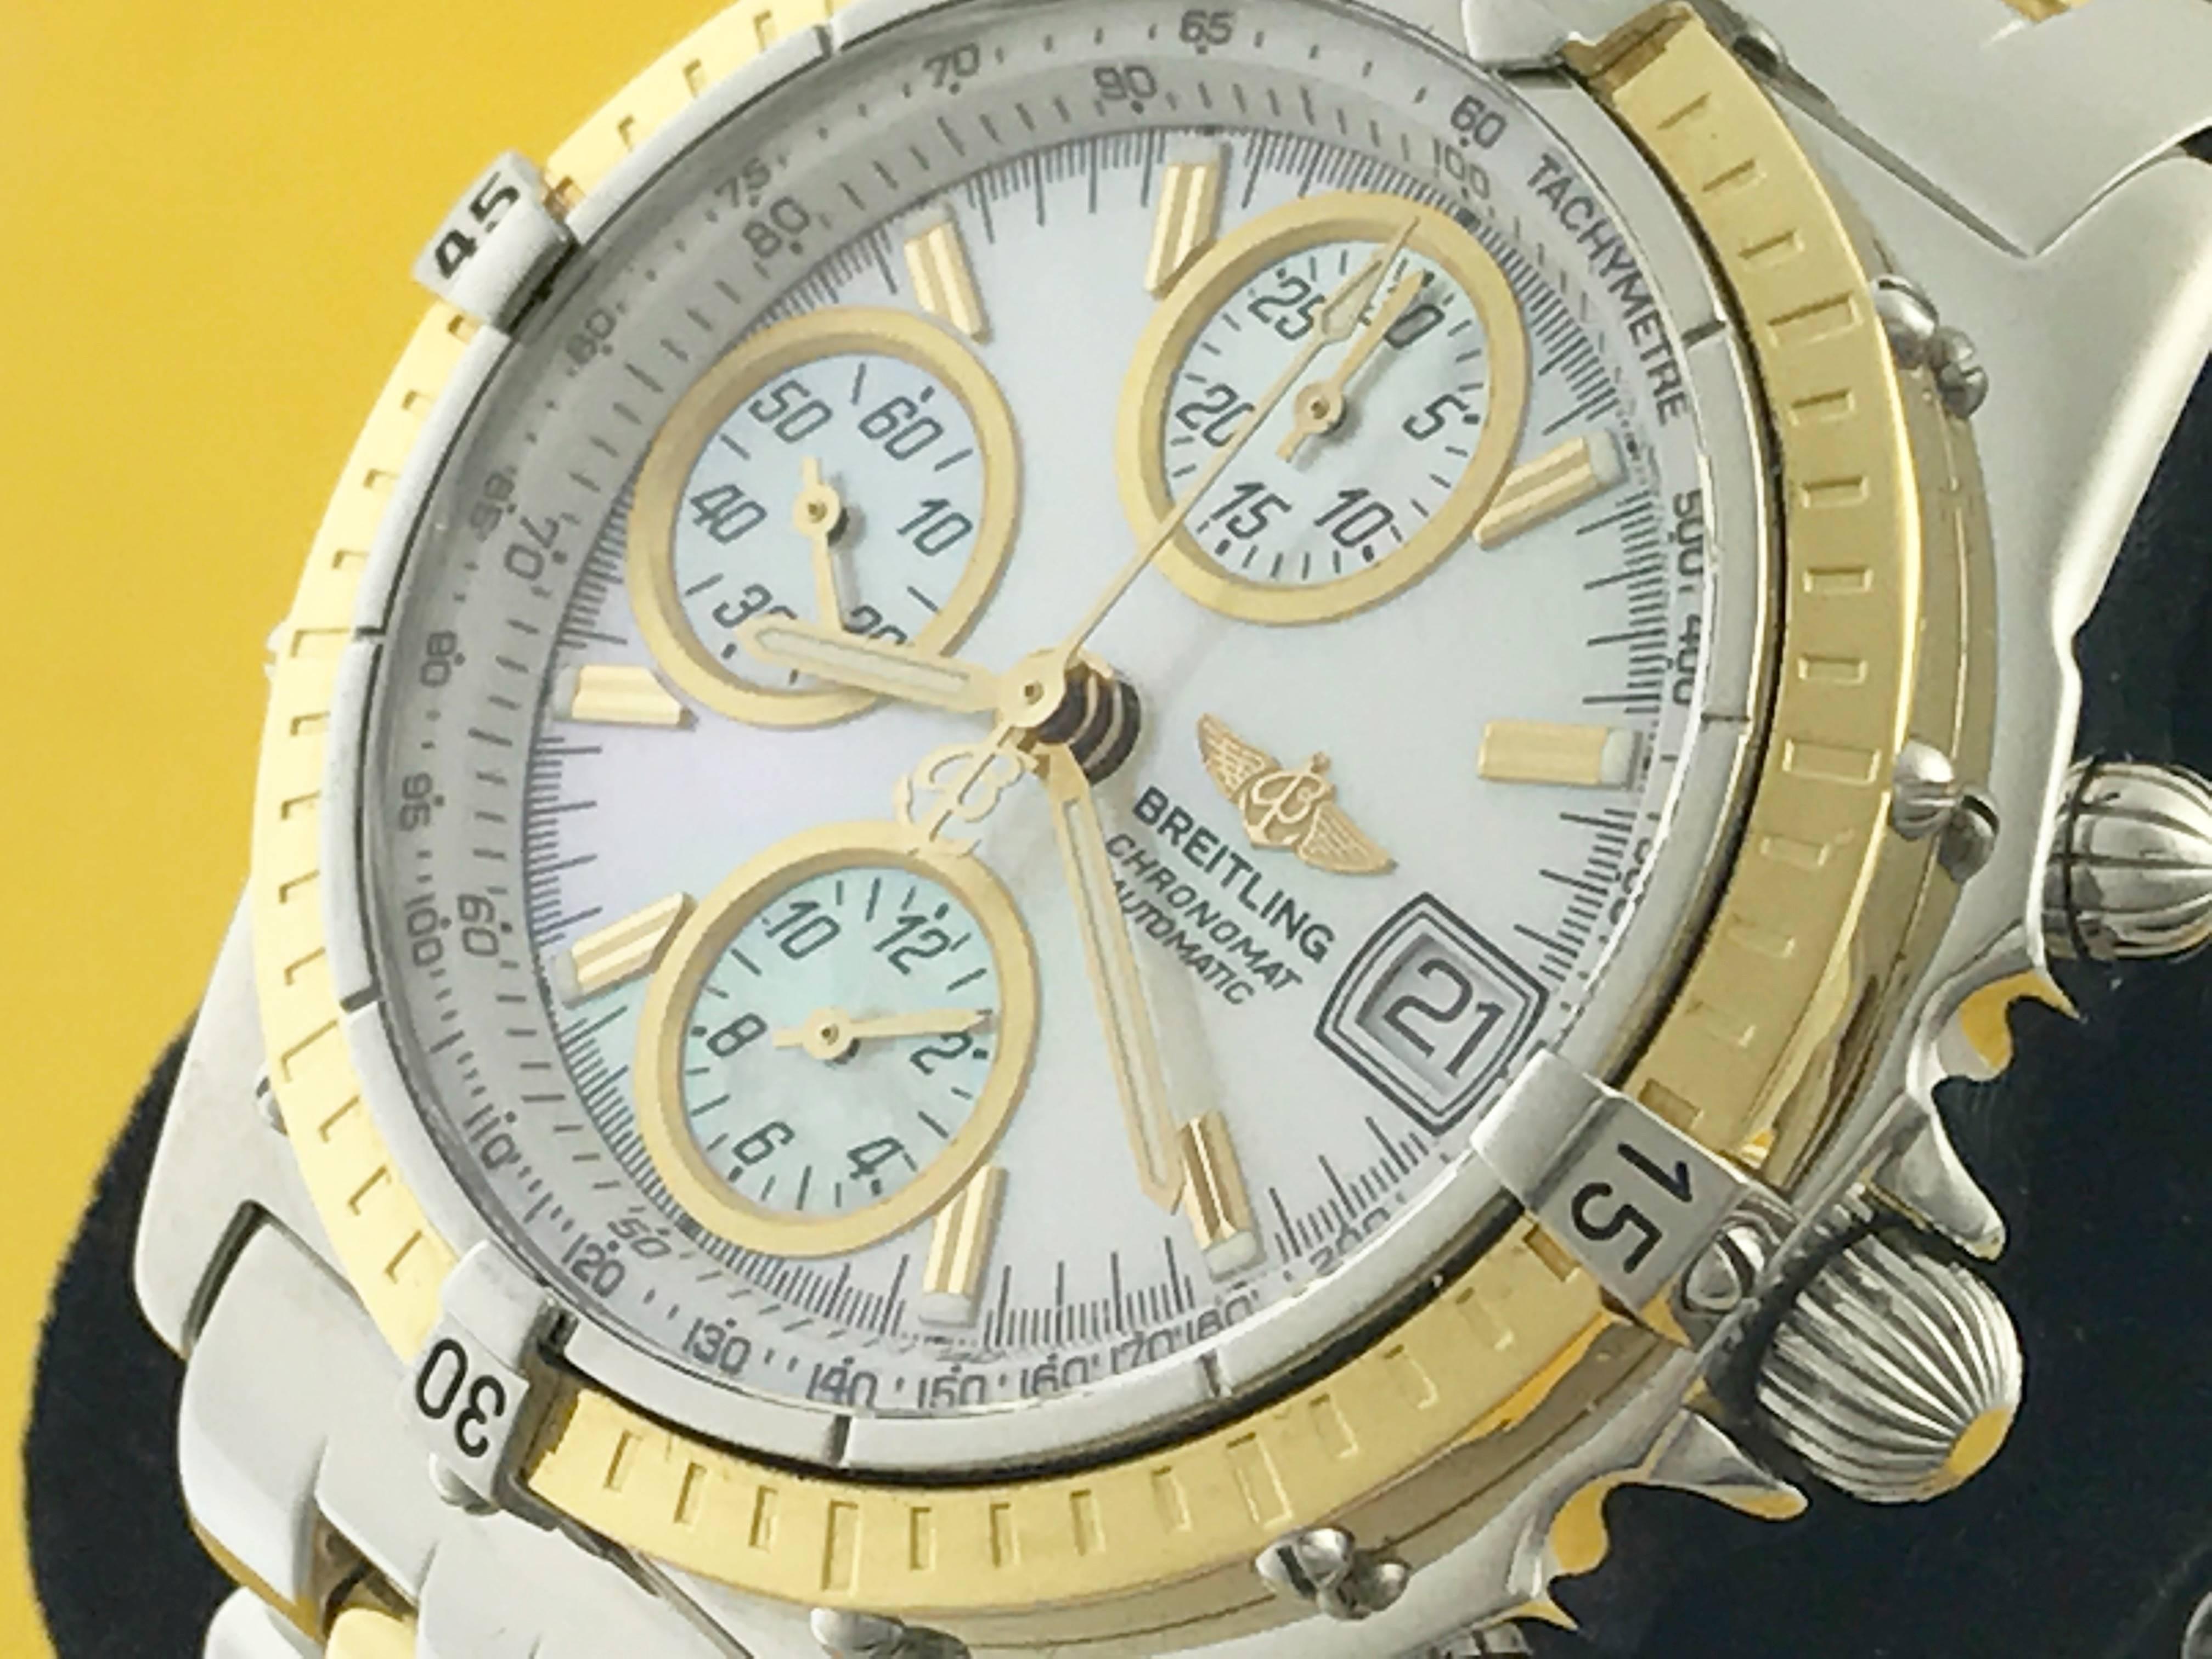 Manufacturer: Breitling
Model Name: Chronomat
Model Num: D13050.1
Condition: Pre Owned
Watch Category: Contemporary
Gender: Mens
Movement Comment: Chronograph
Movement: Automatic Winding with Date
Dial: Mother of Pearl Dial with Yellow Gold hour